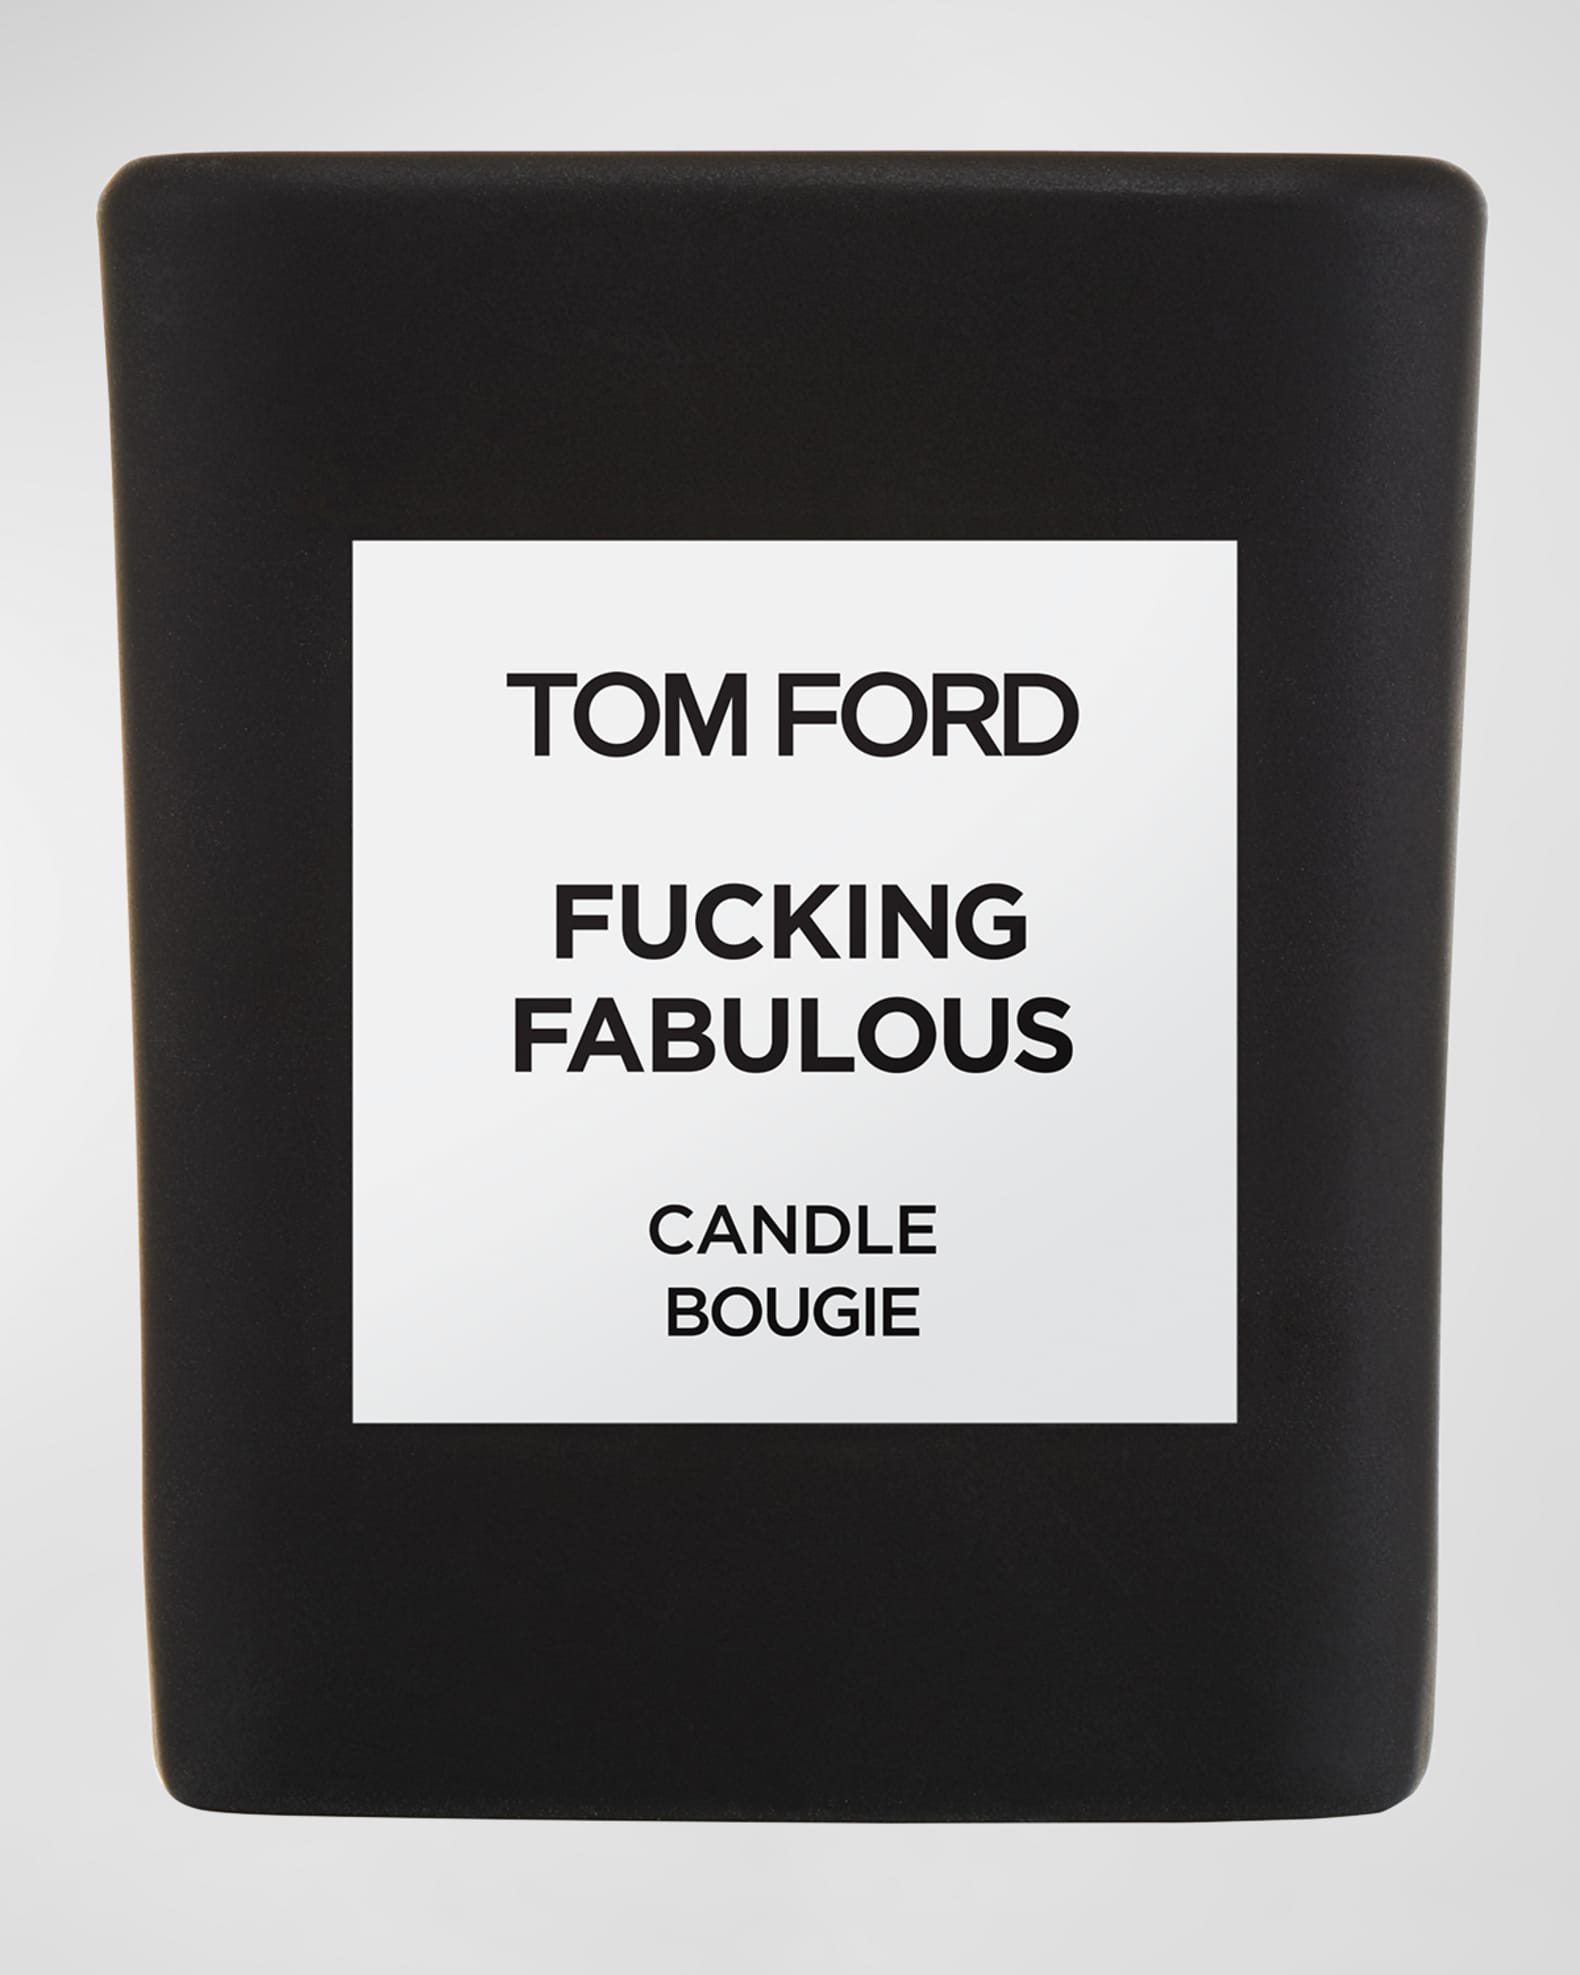 TOM FORD 21 oz. Fabulous Candle | Neiman Marcus